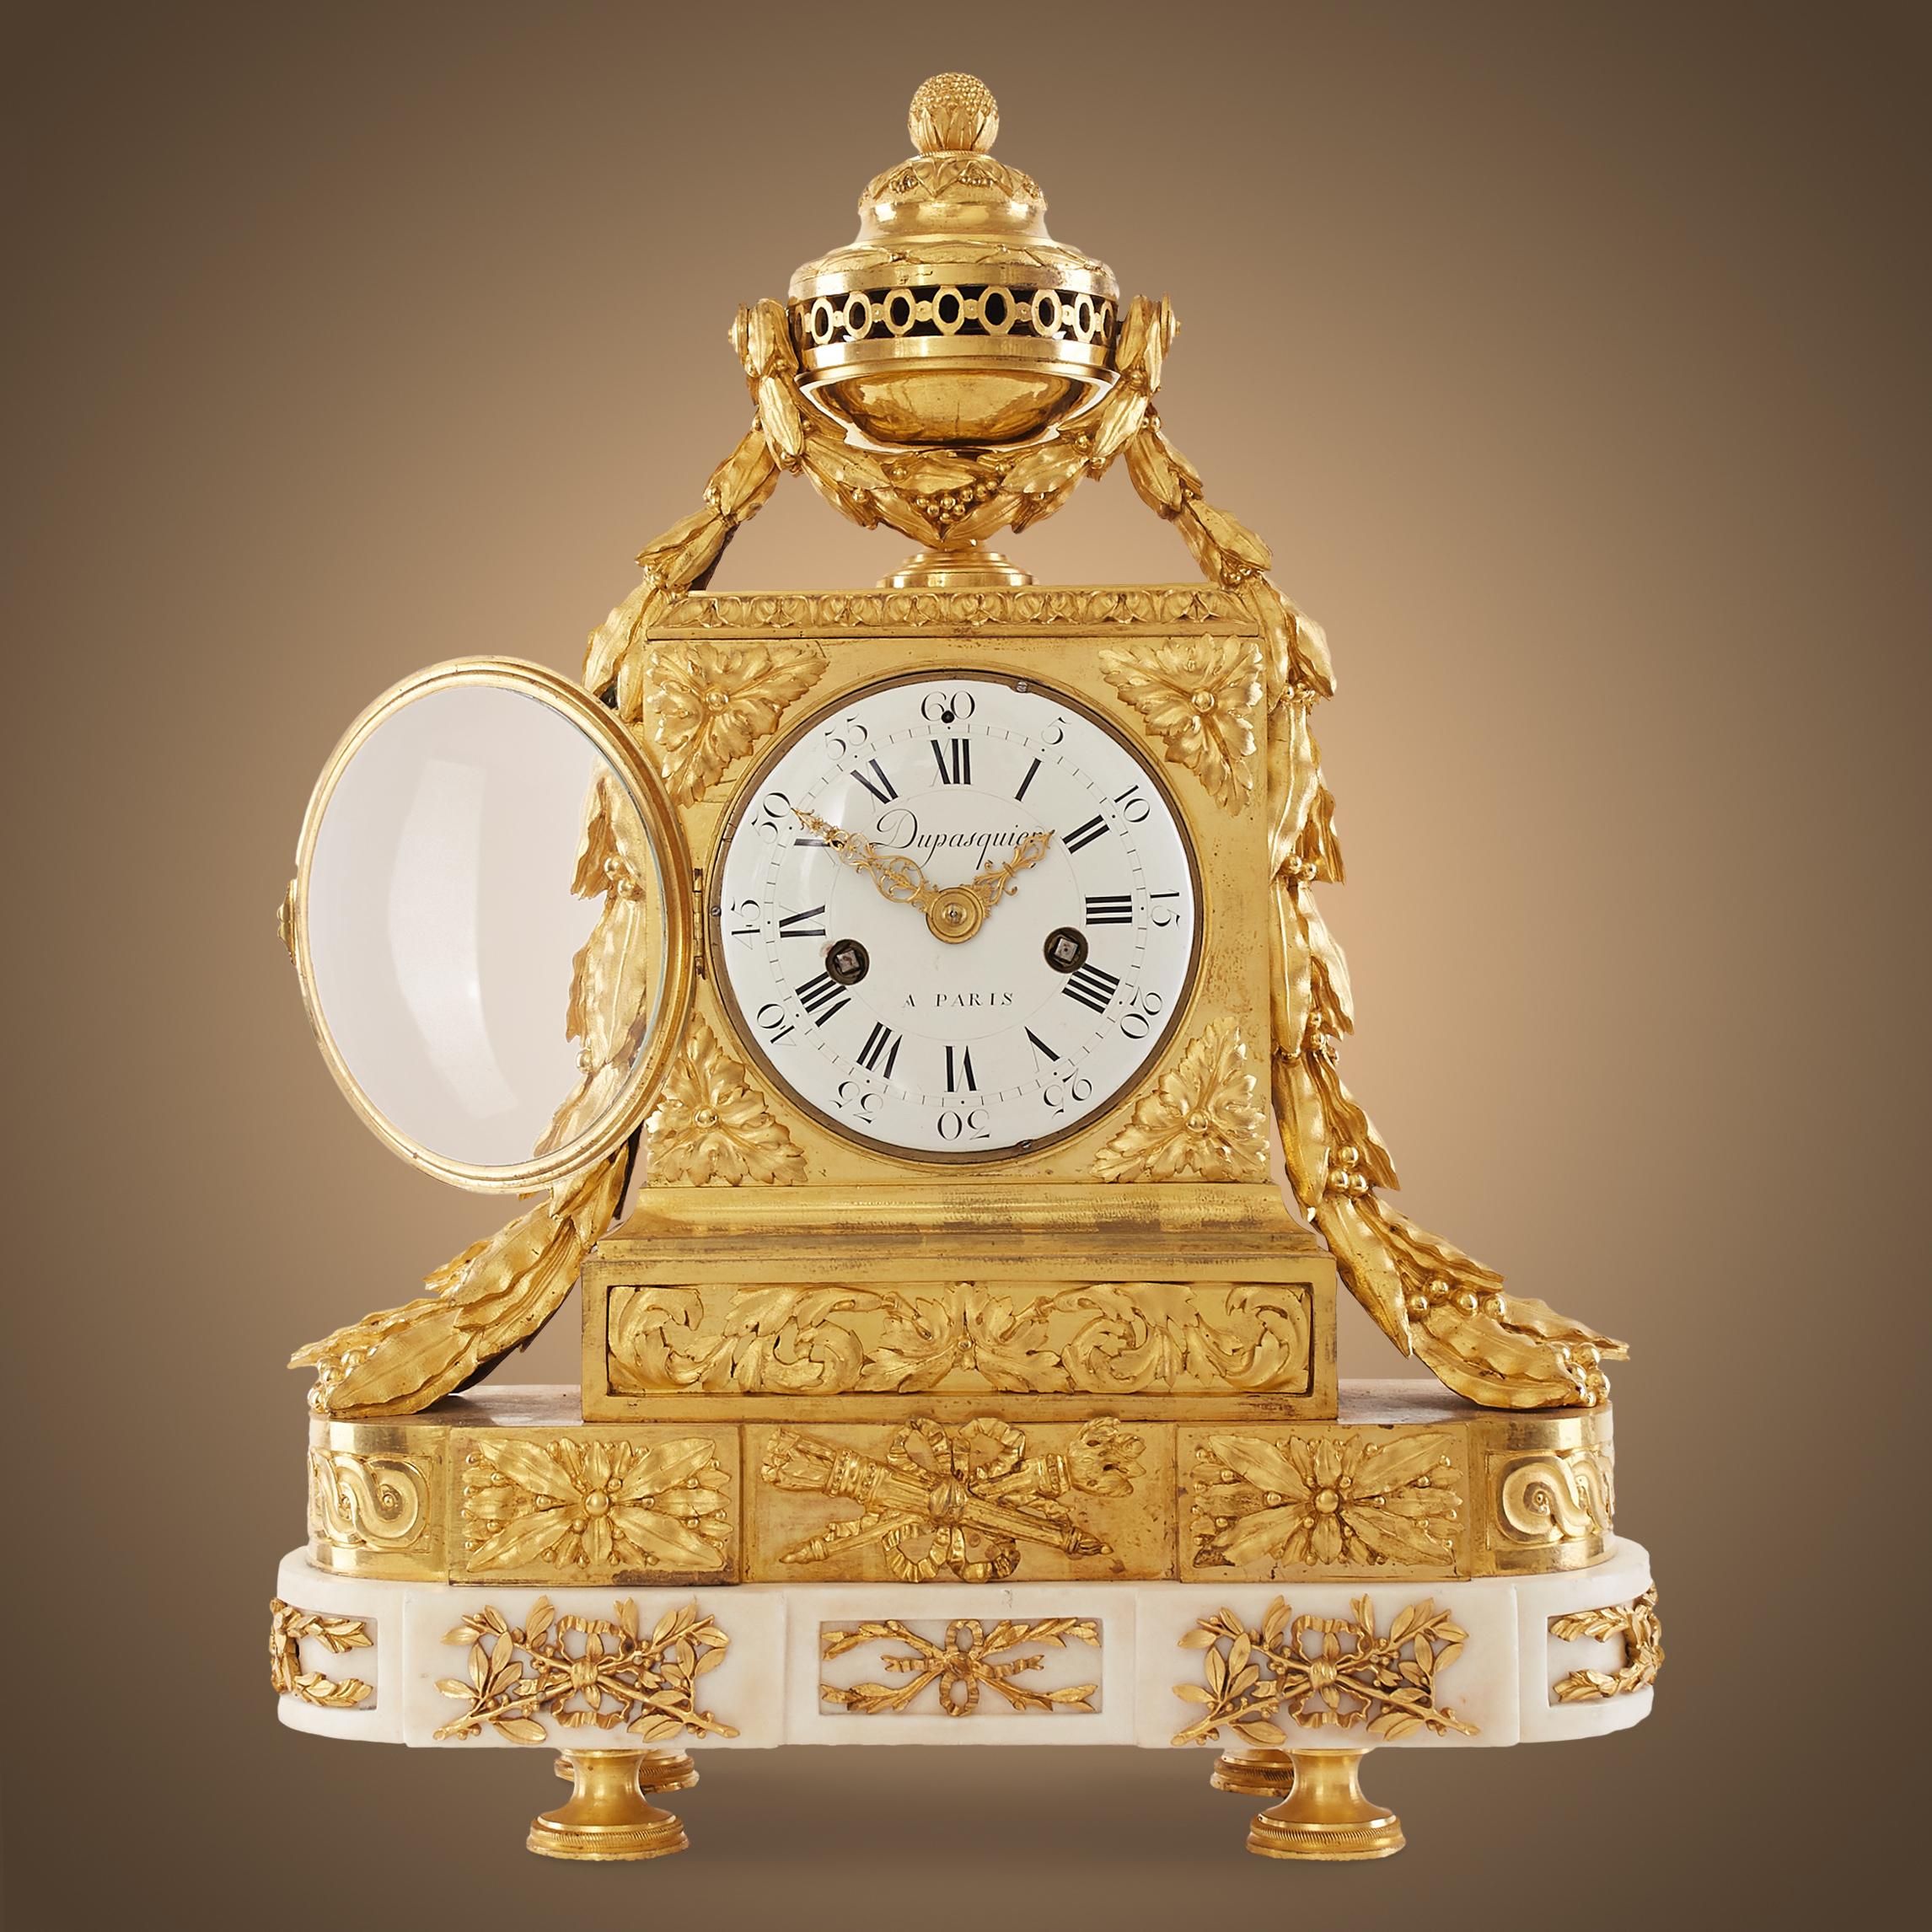 The outstanding mantel clock is in the style of Louis XVI – Louis Seize (1774-1792). Royal breath appears in each motif. 
Almost the entire upper part of the clock is inlaid with ormolu but only the pedestal is made of extremely delicate